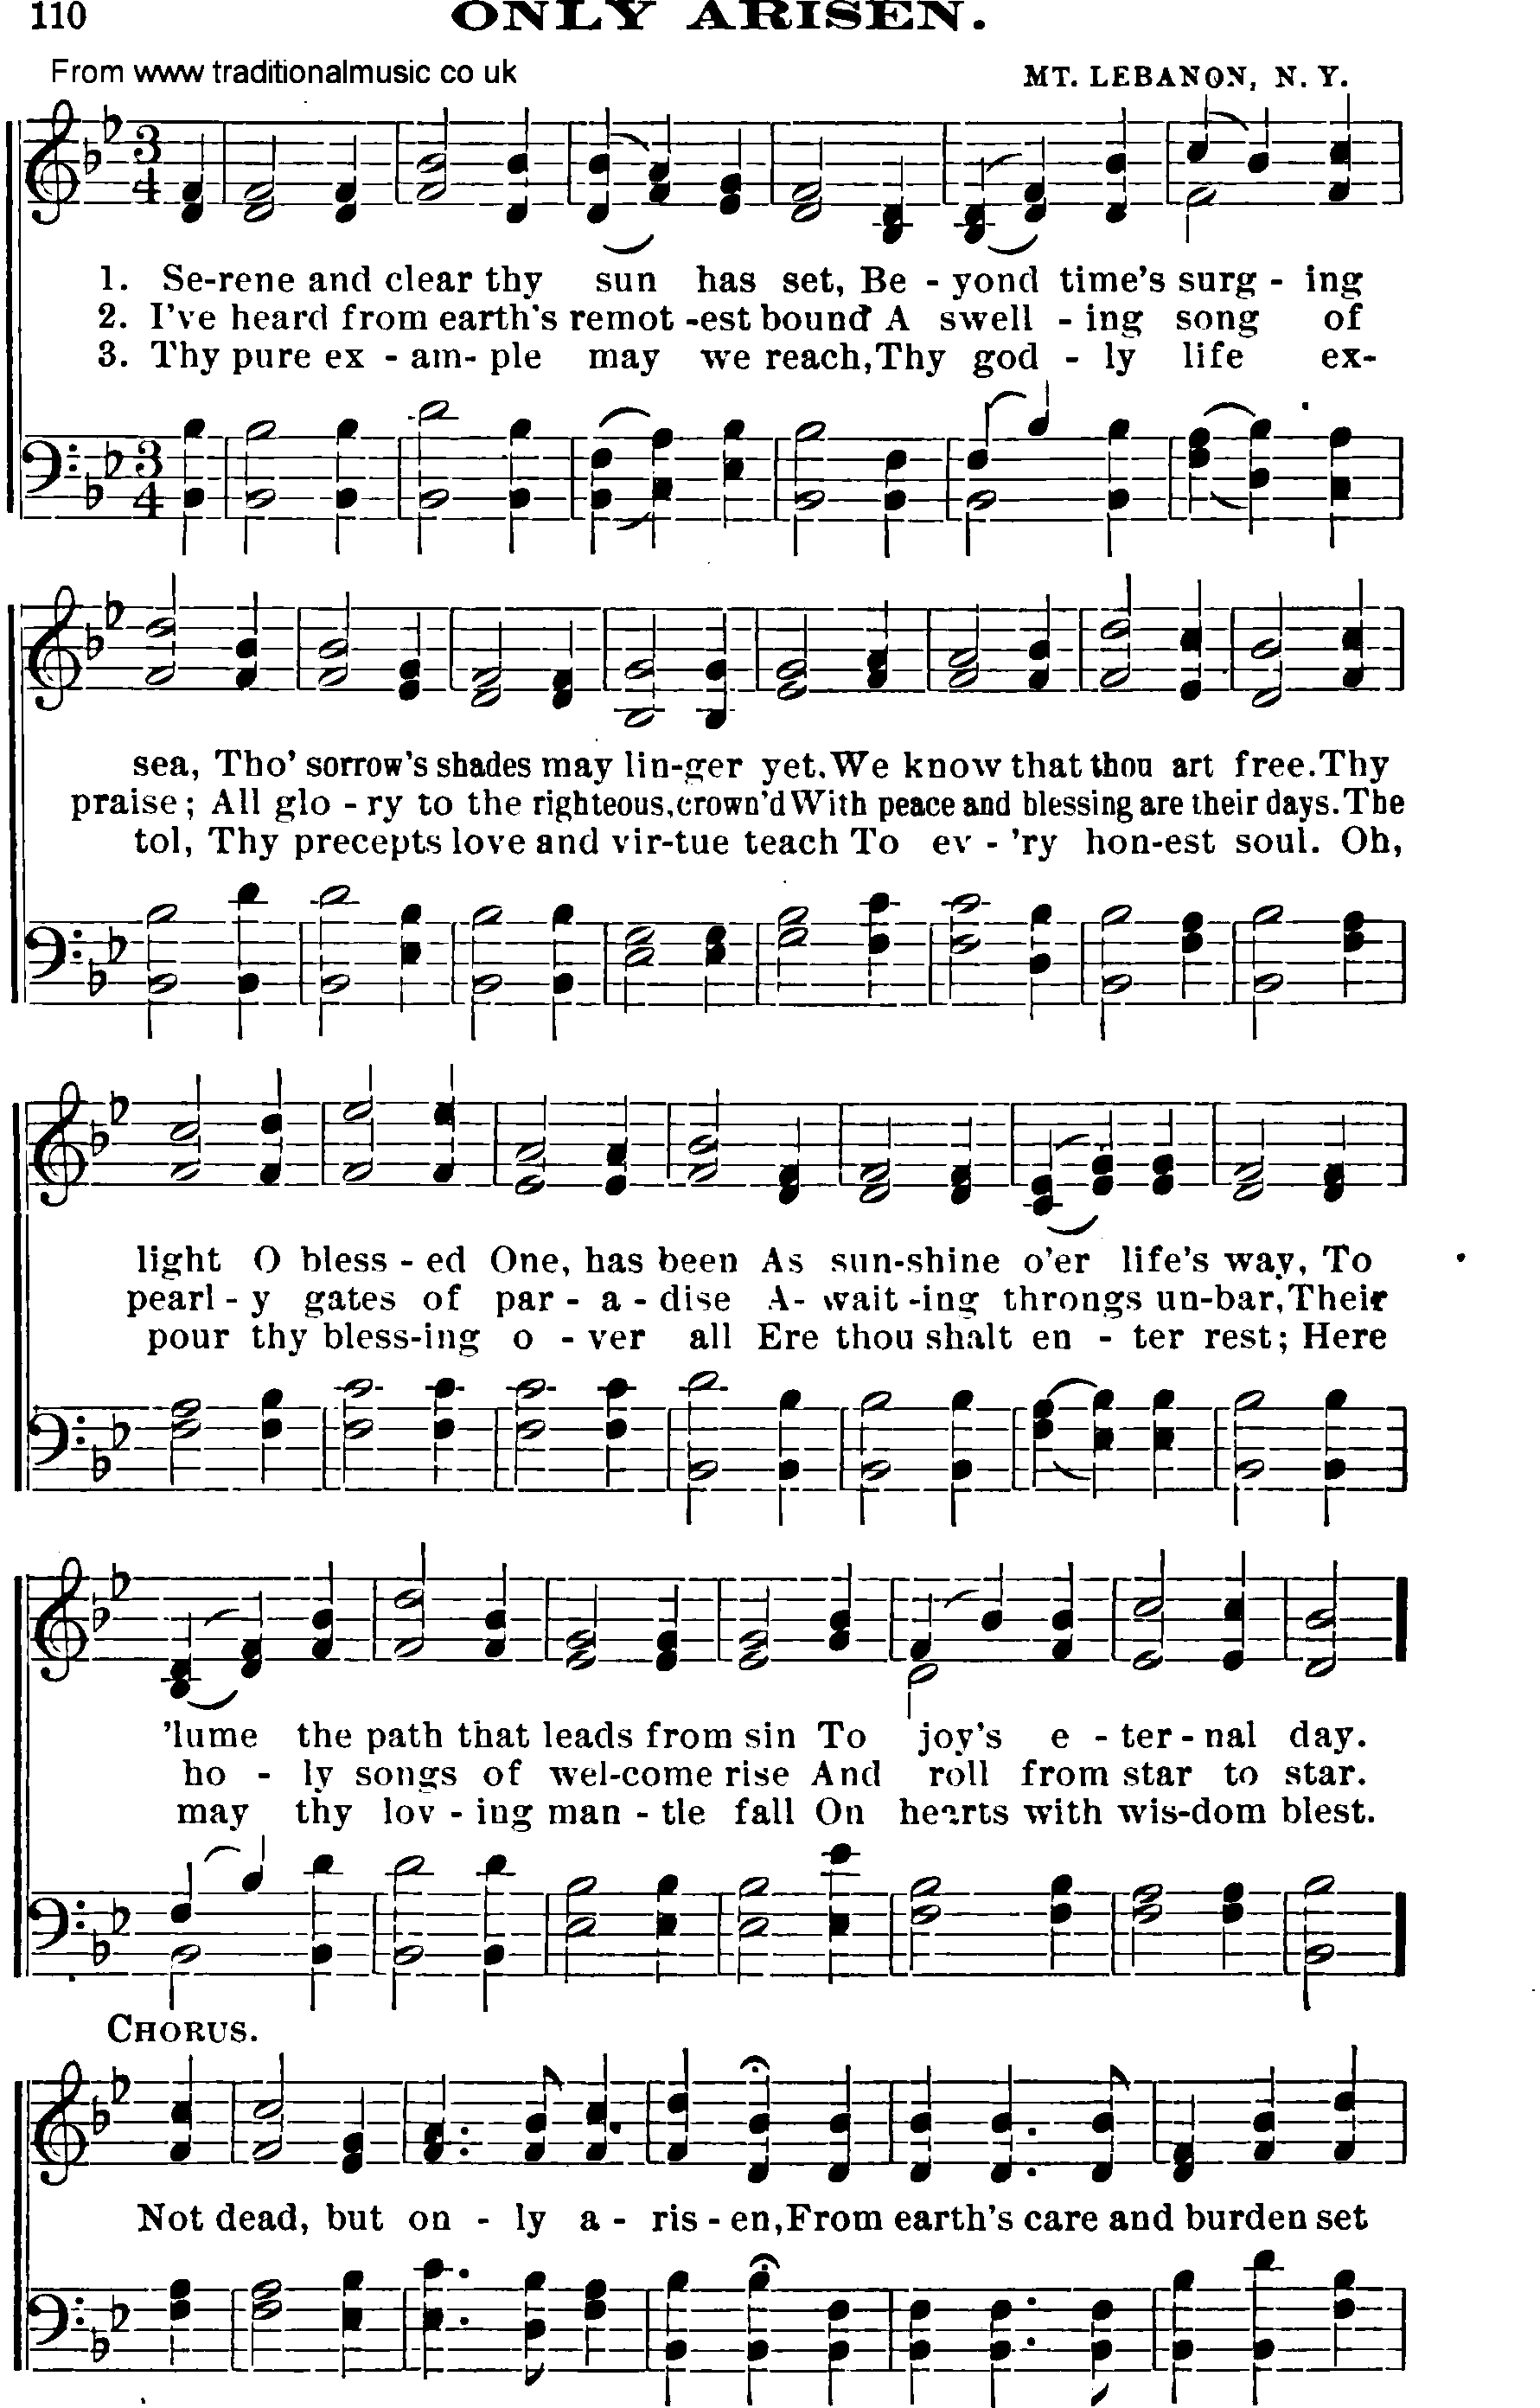 Shaker Music collection, Hymn: only arisen, sheetmusic and PDF